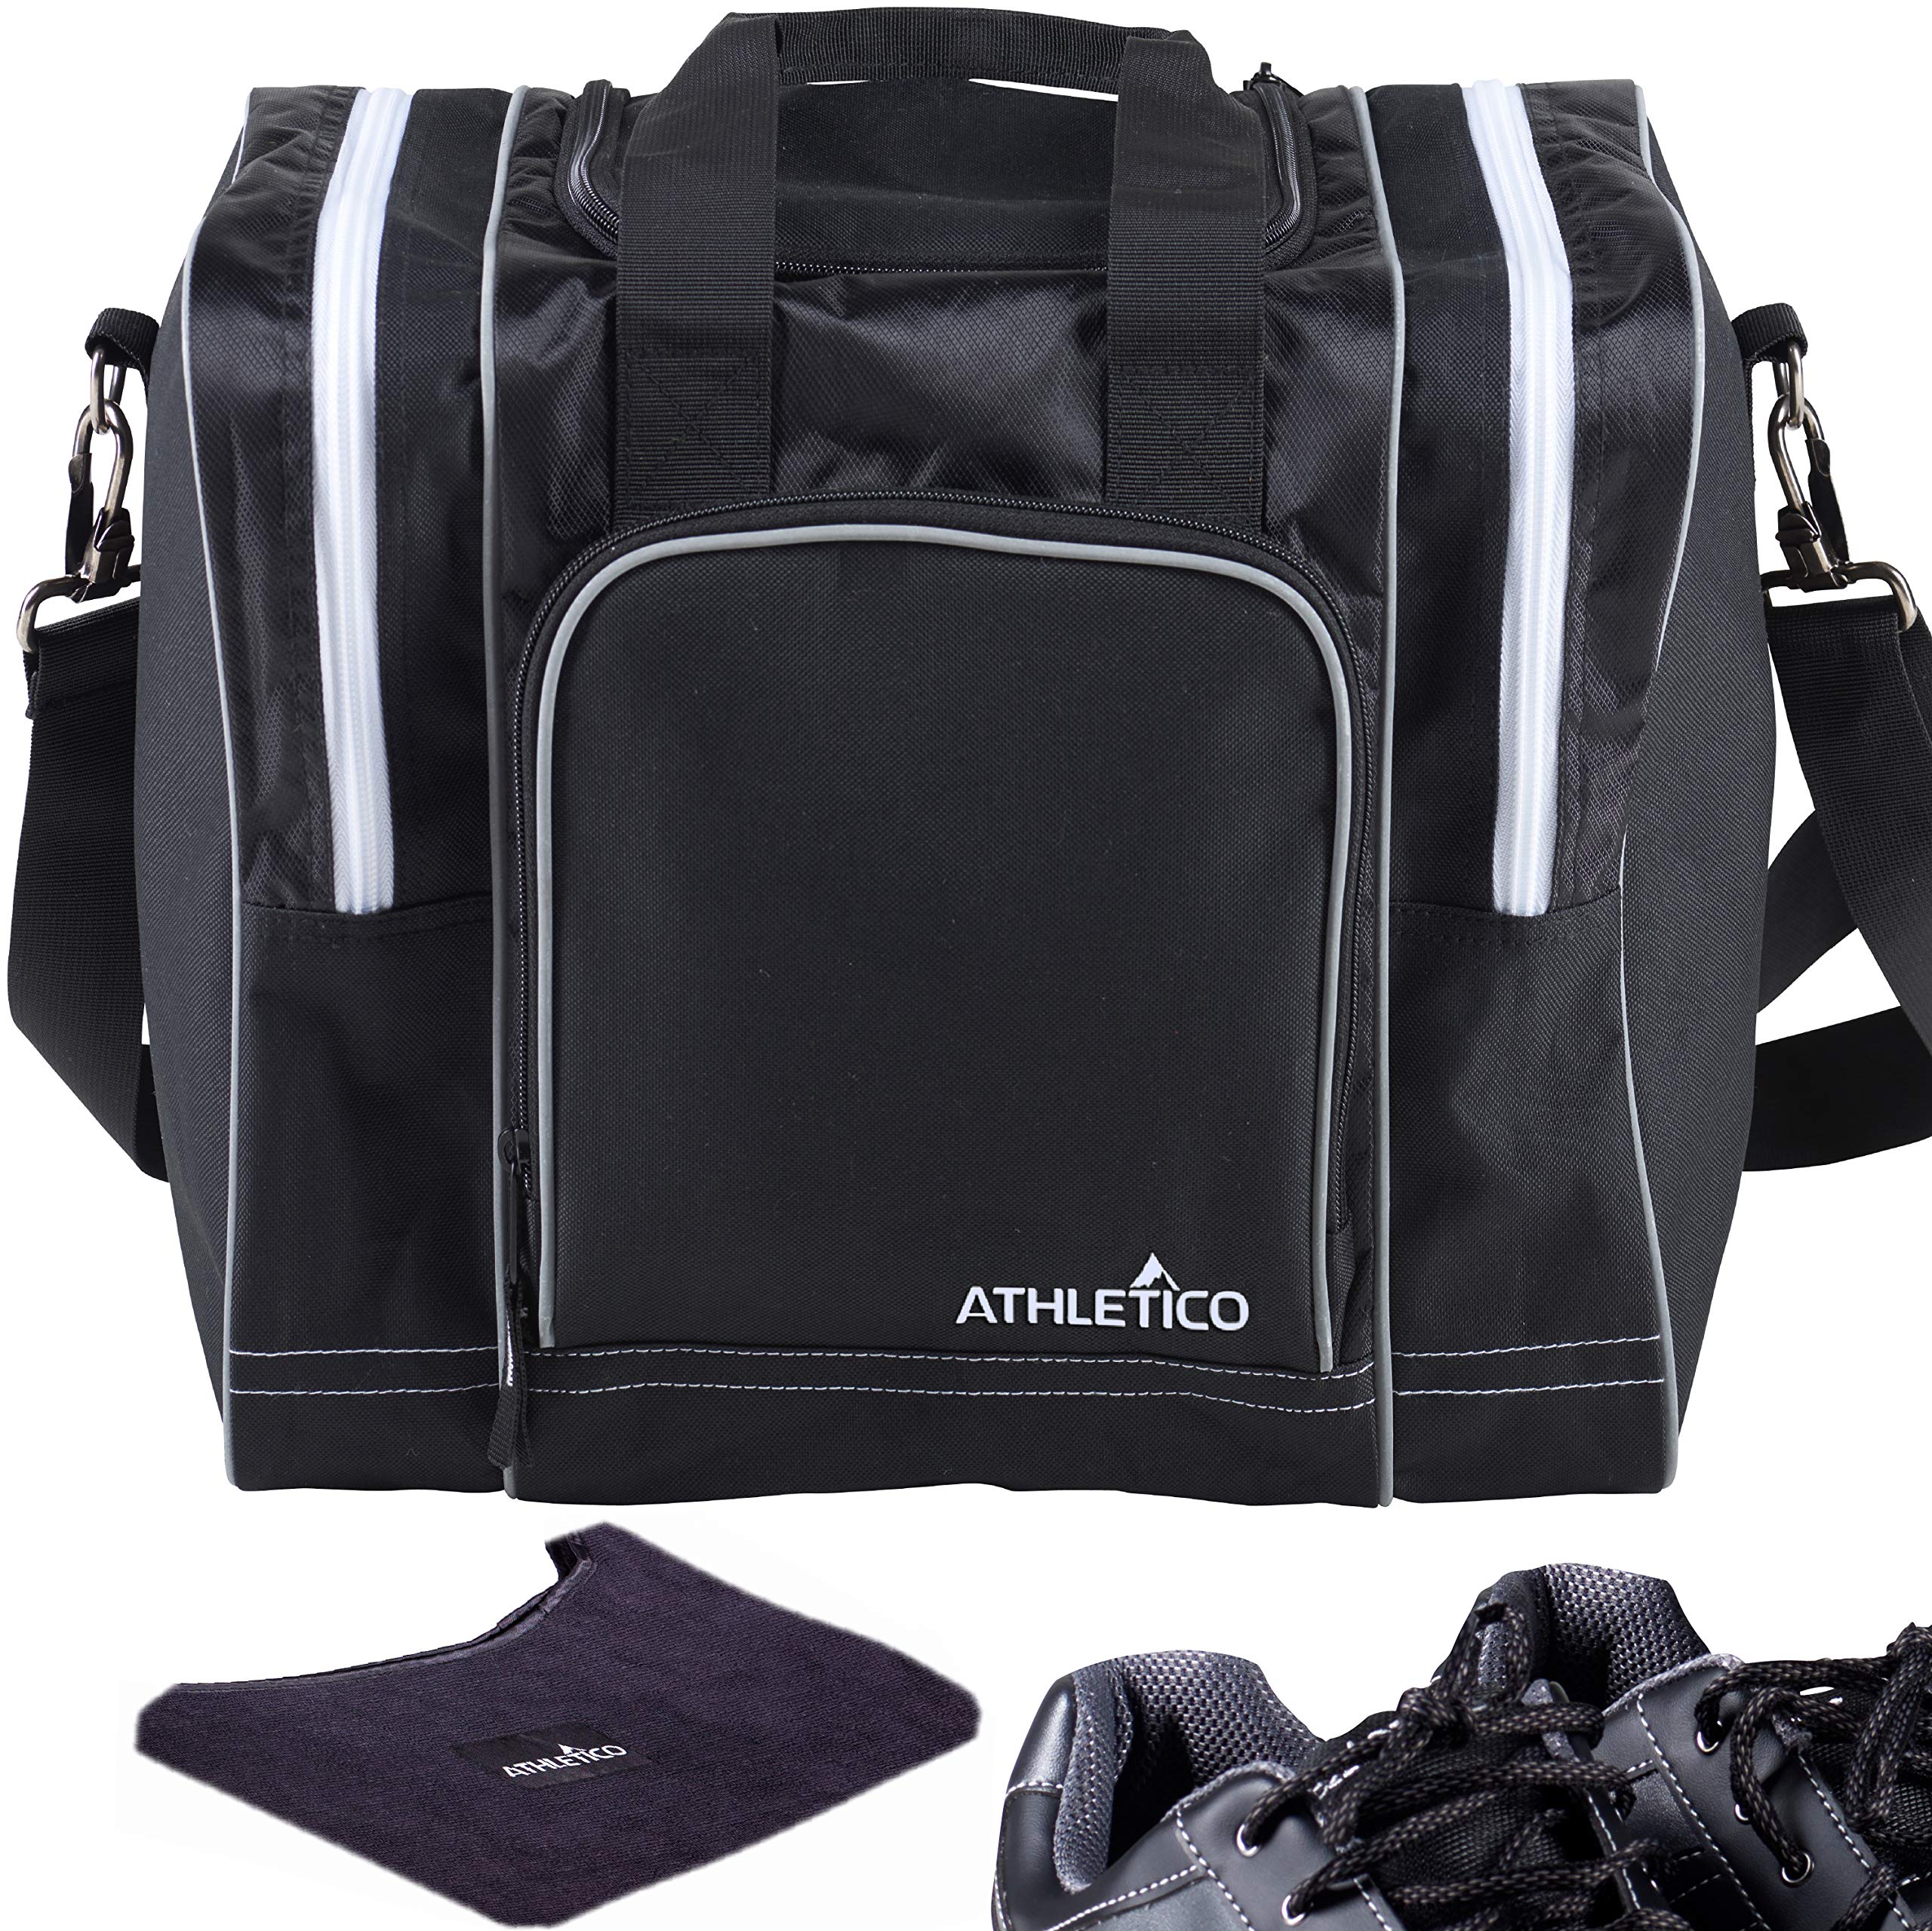 Athletico Bowling Bag & Seesaw Polisher Bundle - Single Ball Tote Bag With Padded Ball Holder - Fits a Single Pair of Bowling Shoes Up to Mens Size 14 (Black)  - Acceptable